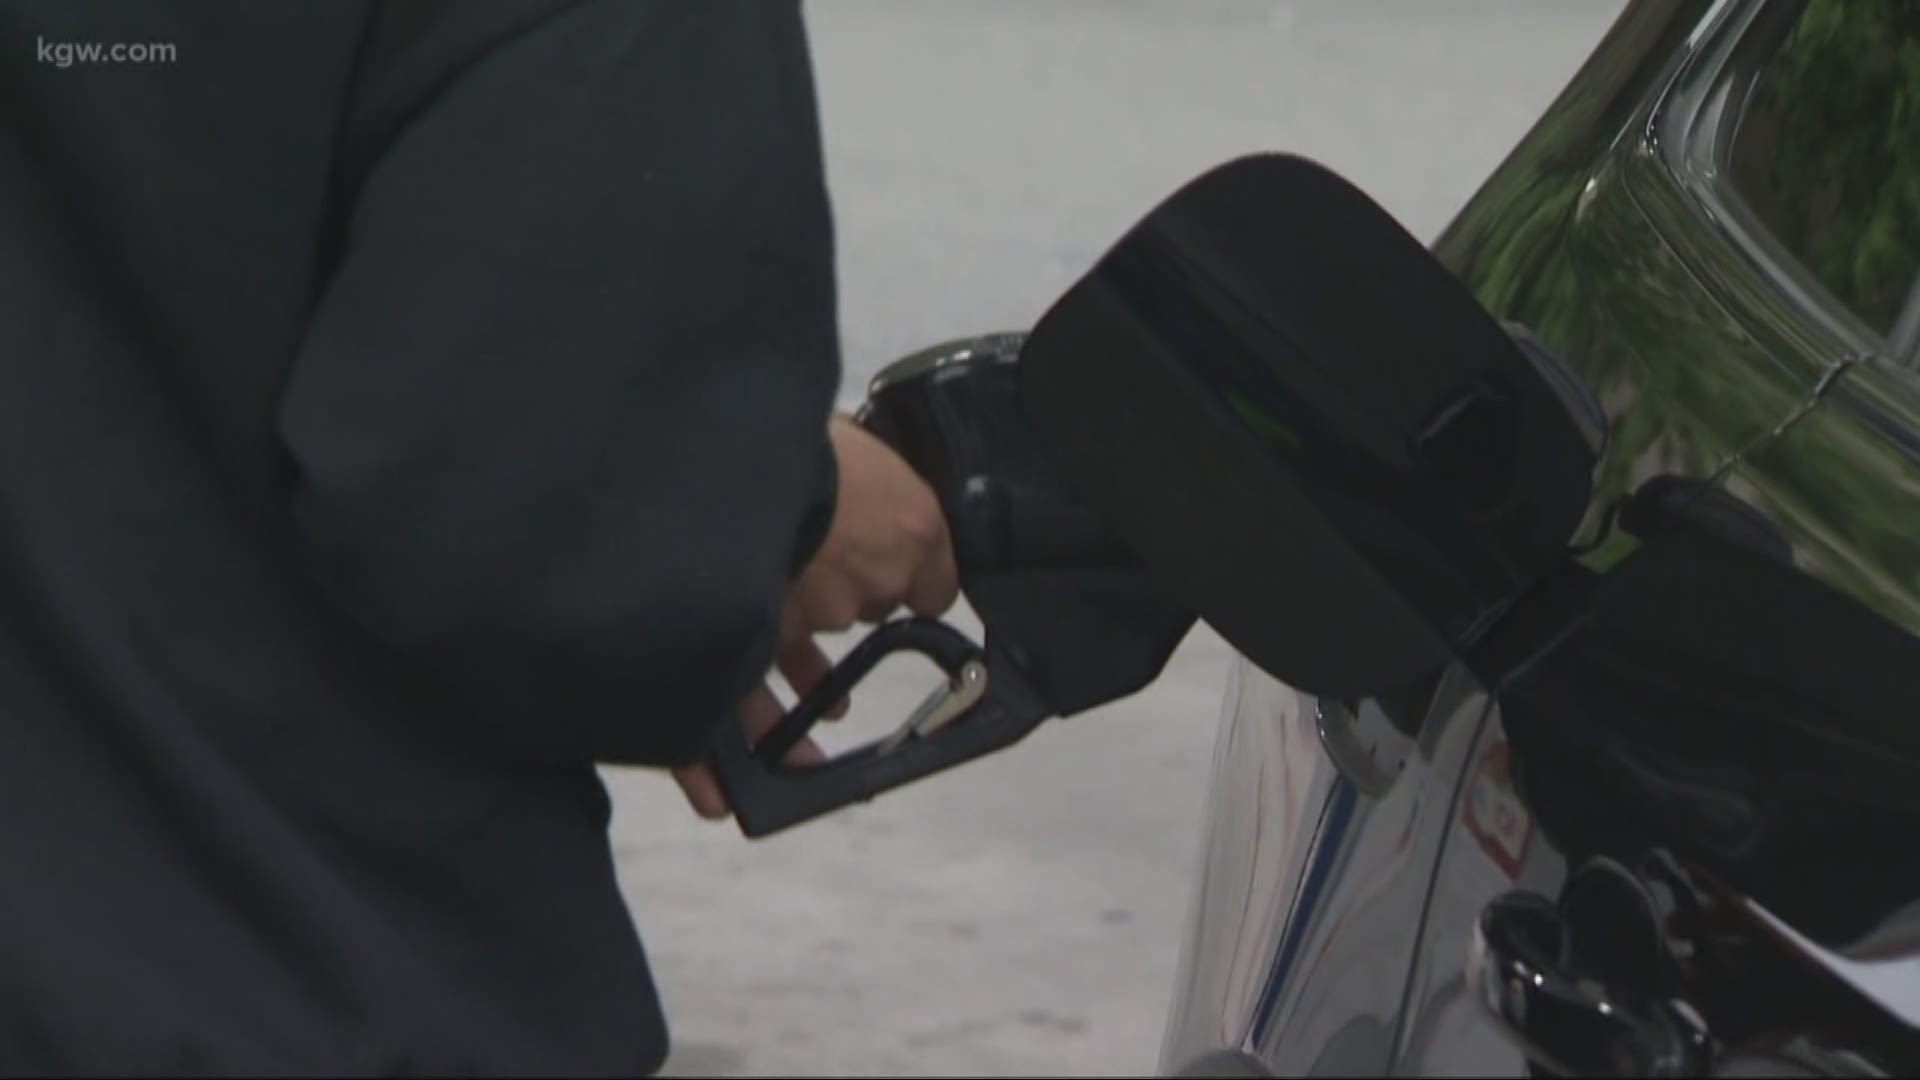 Memorial Holiday weekend will see highest gas prices since 2014